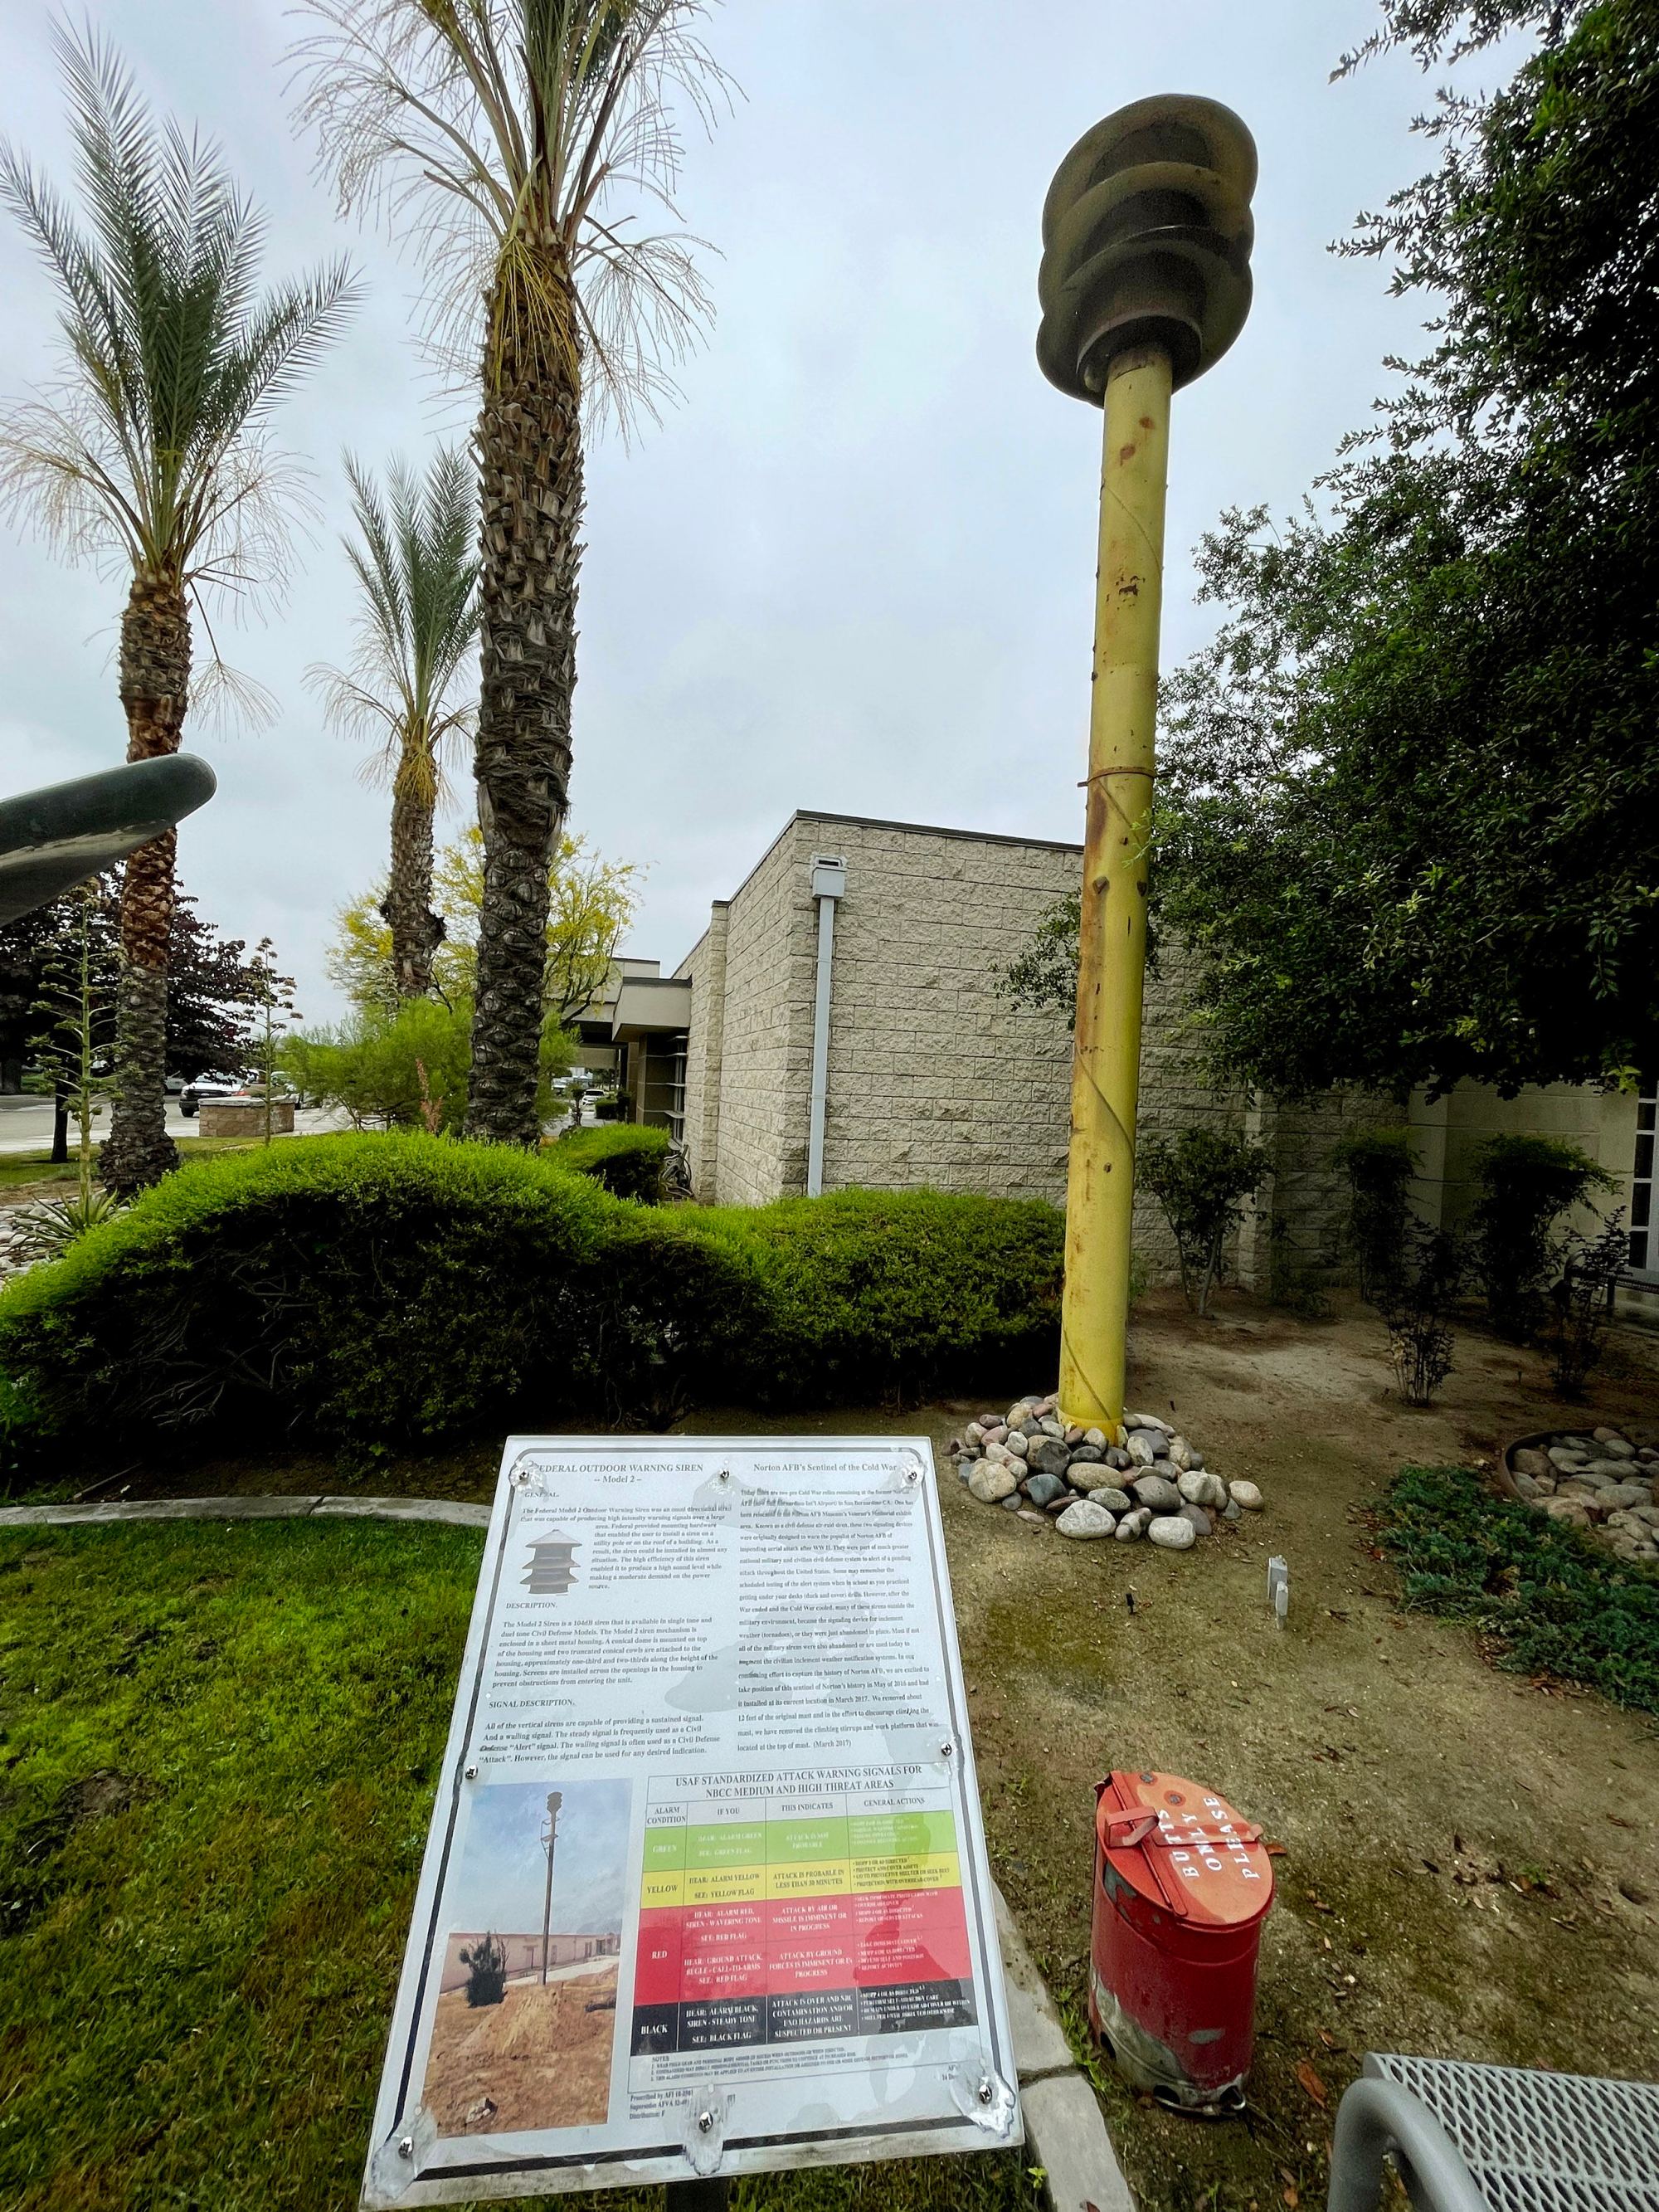 12 feet of mast and the climbing stirrups were removed from the Federal Model 2 Outdoor warning vertical siren on display at Norton Air Force Base Museum in San Bernardino on Friday May 20, 2022. (Photo by Milka Soko, Contributing Photographer)